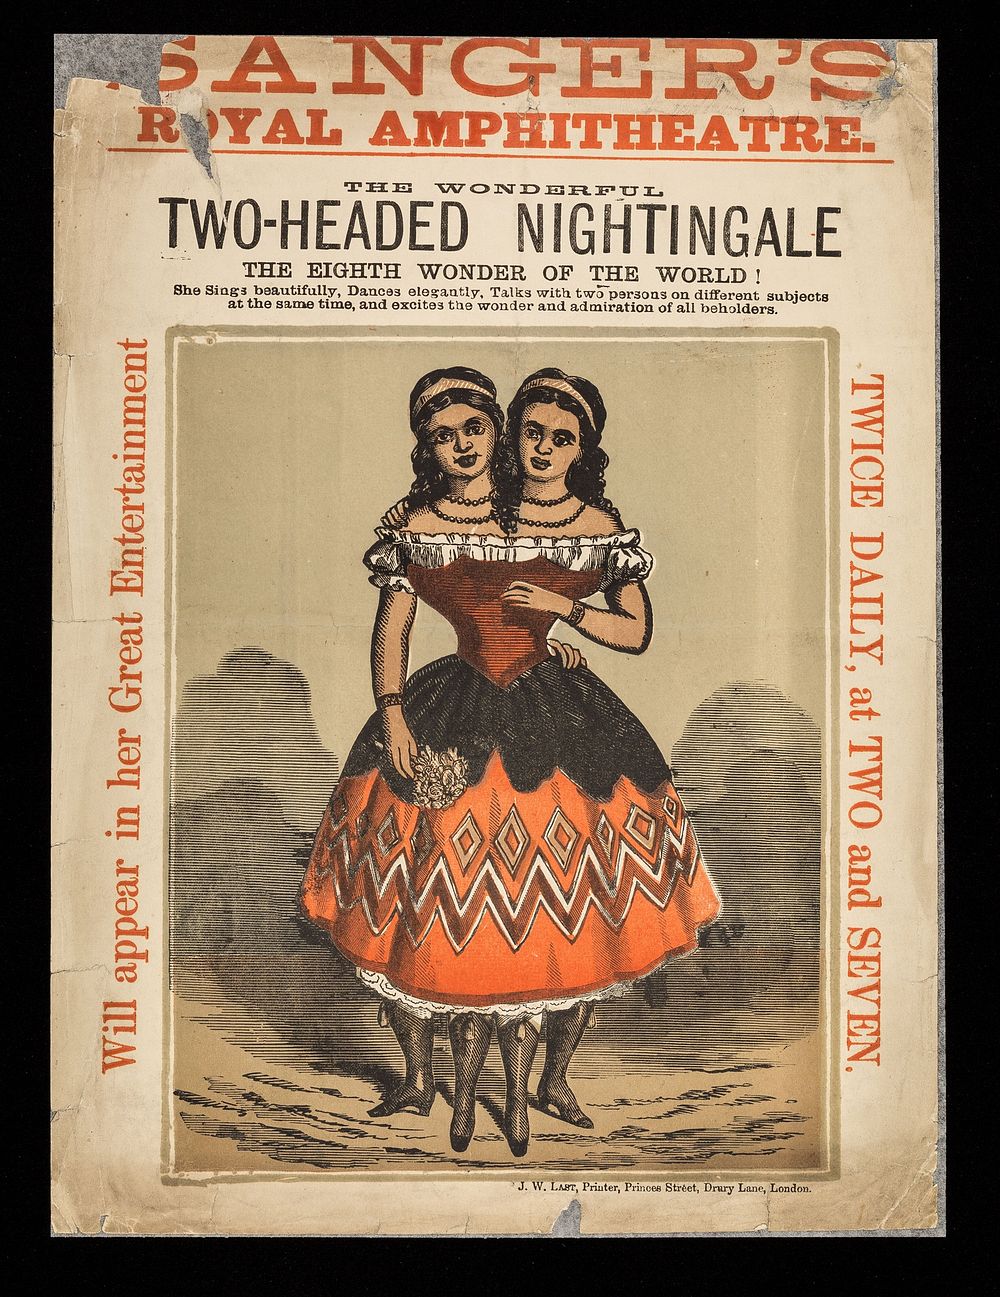 The wonderful two-headed nightingale : the eighth wonder of the world / Sanger's Royal Amphitheatre.